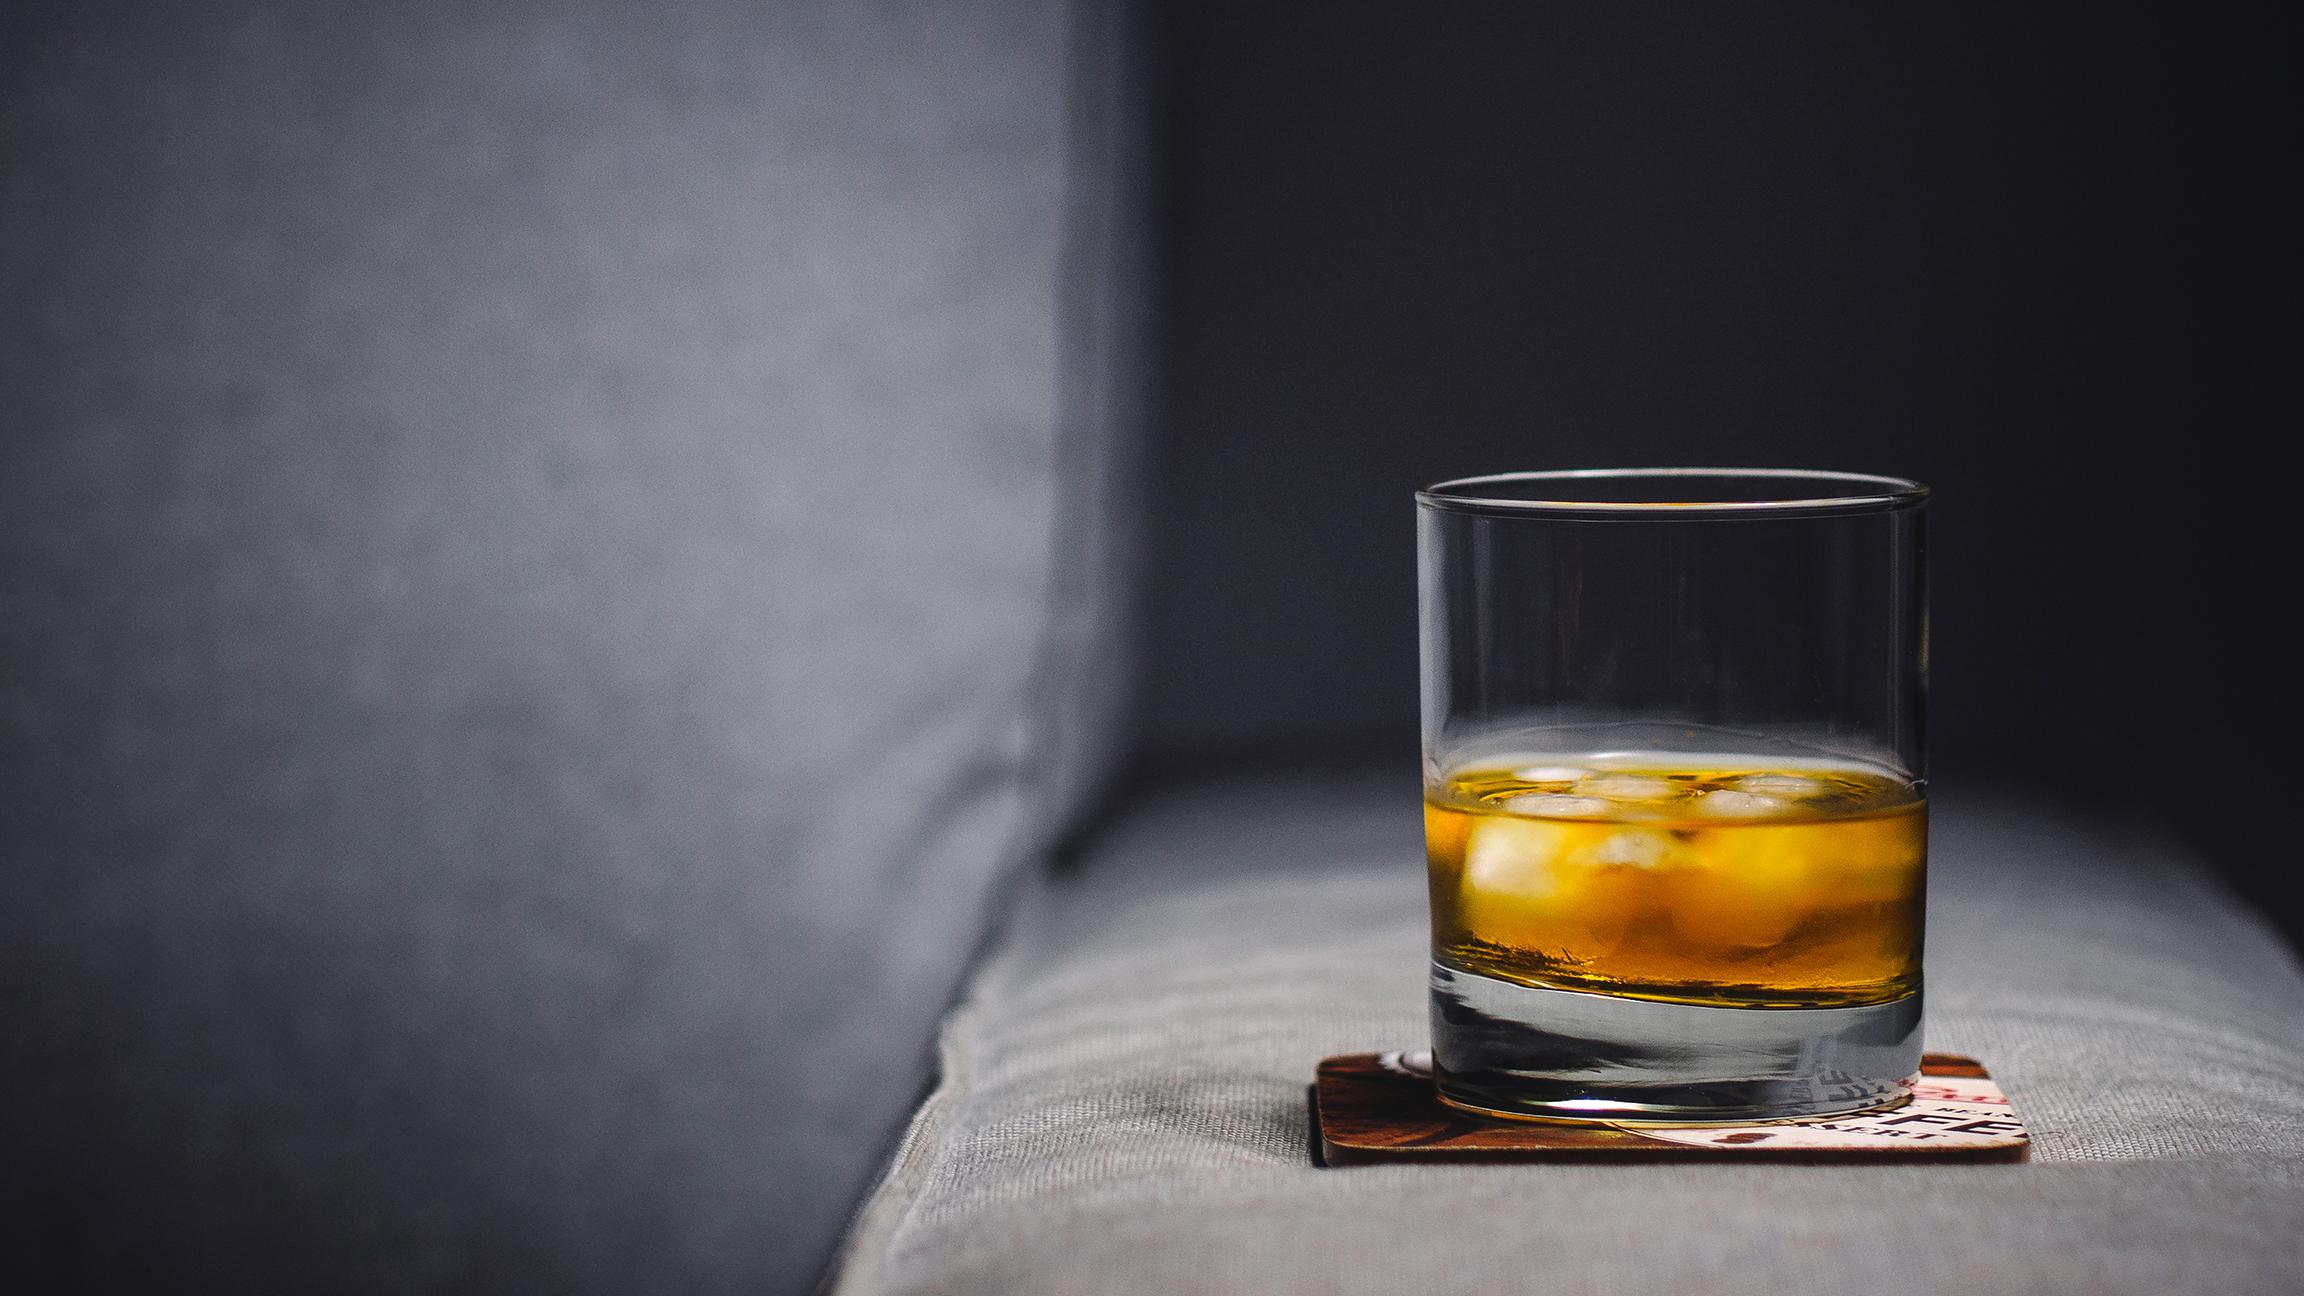 Sample sale: 50 varieties of whiskey, scotch and bourbon await your palate in River North.